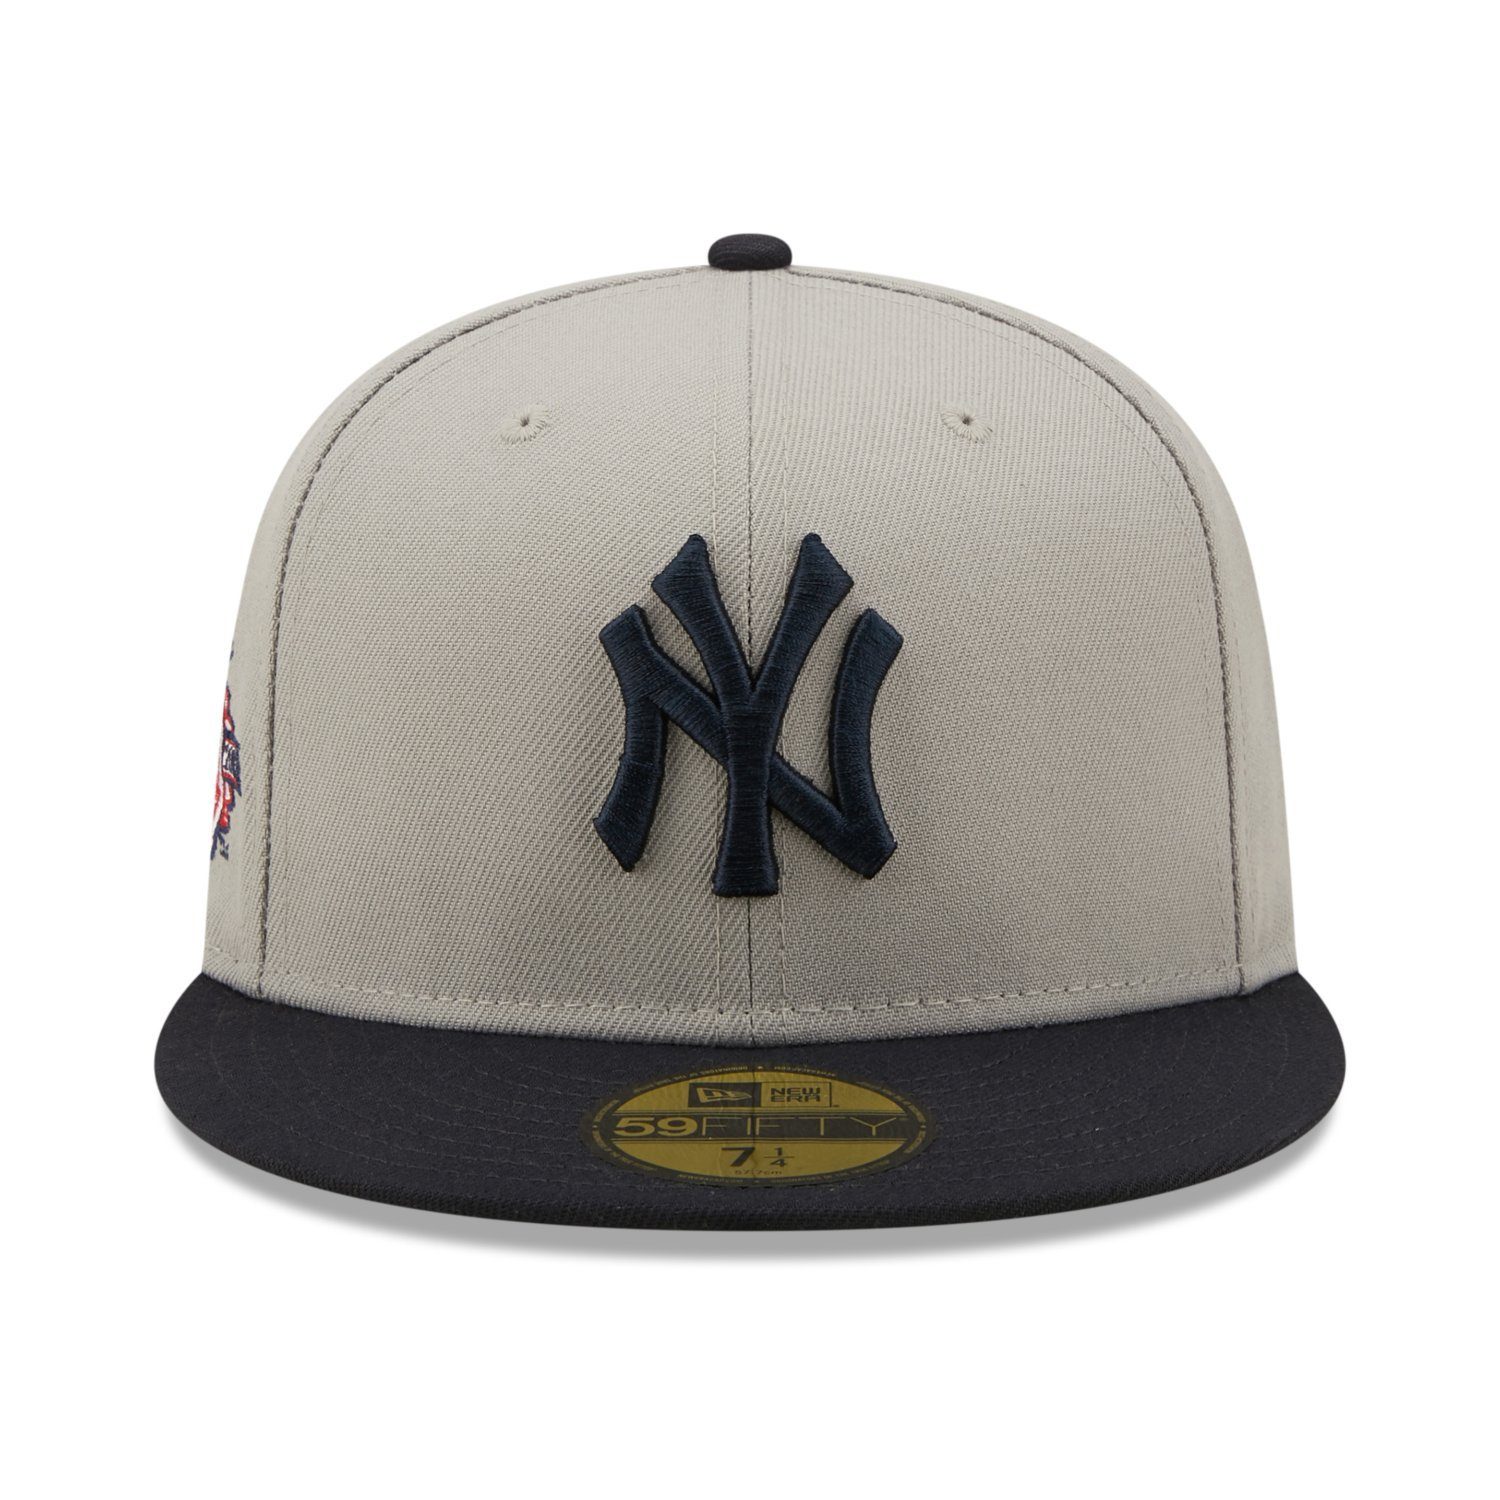 New Era Fitted Cap PATCH York 59Fifty New Yankees SIDE